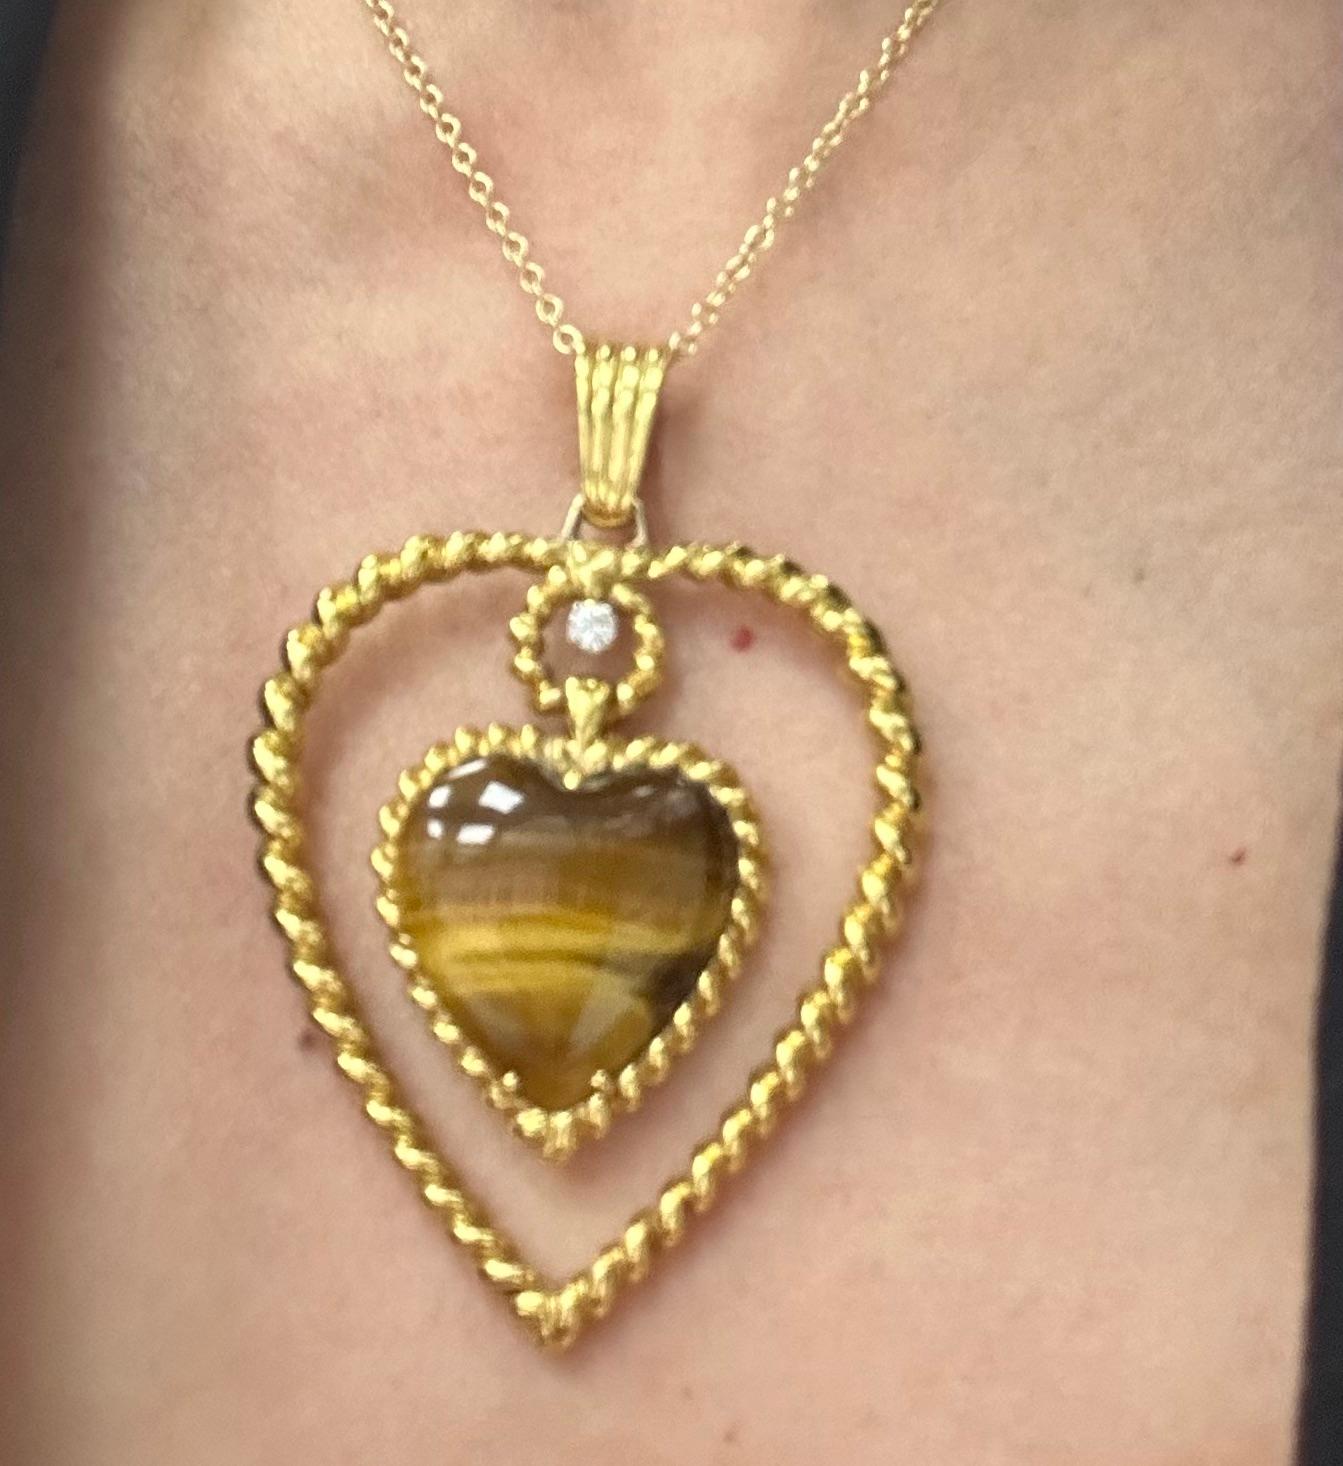 Van Cleef & Arpels tiger's eye heart pendant long necklace 

Pendant is made out of 18 karat yellow gold and has a heart-shaped tiger's eye as well as a round-cut diamond; width 1.75 inches, length 2 inches; marked VCA, 16V395-1
Chain is made out of